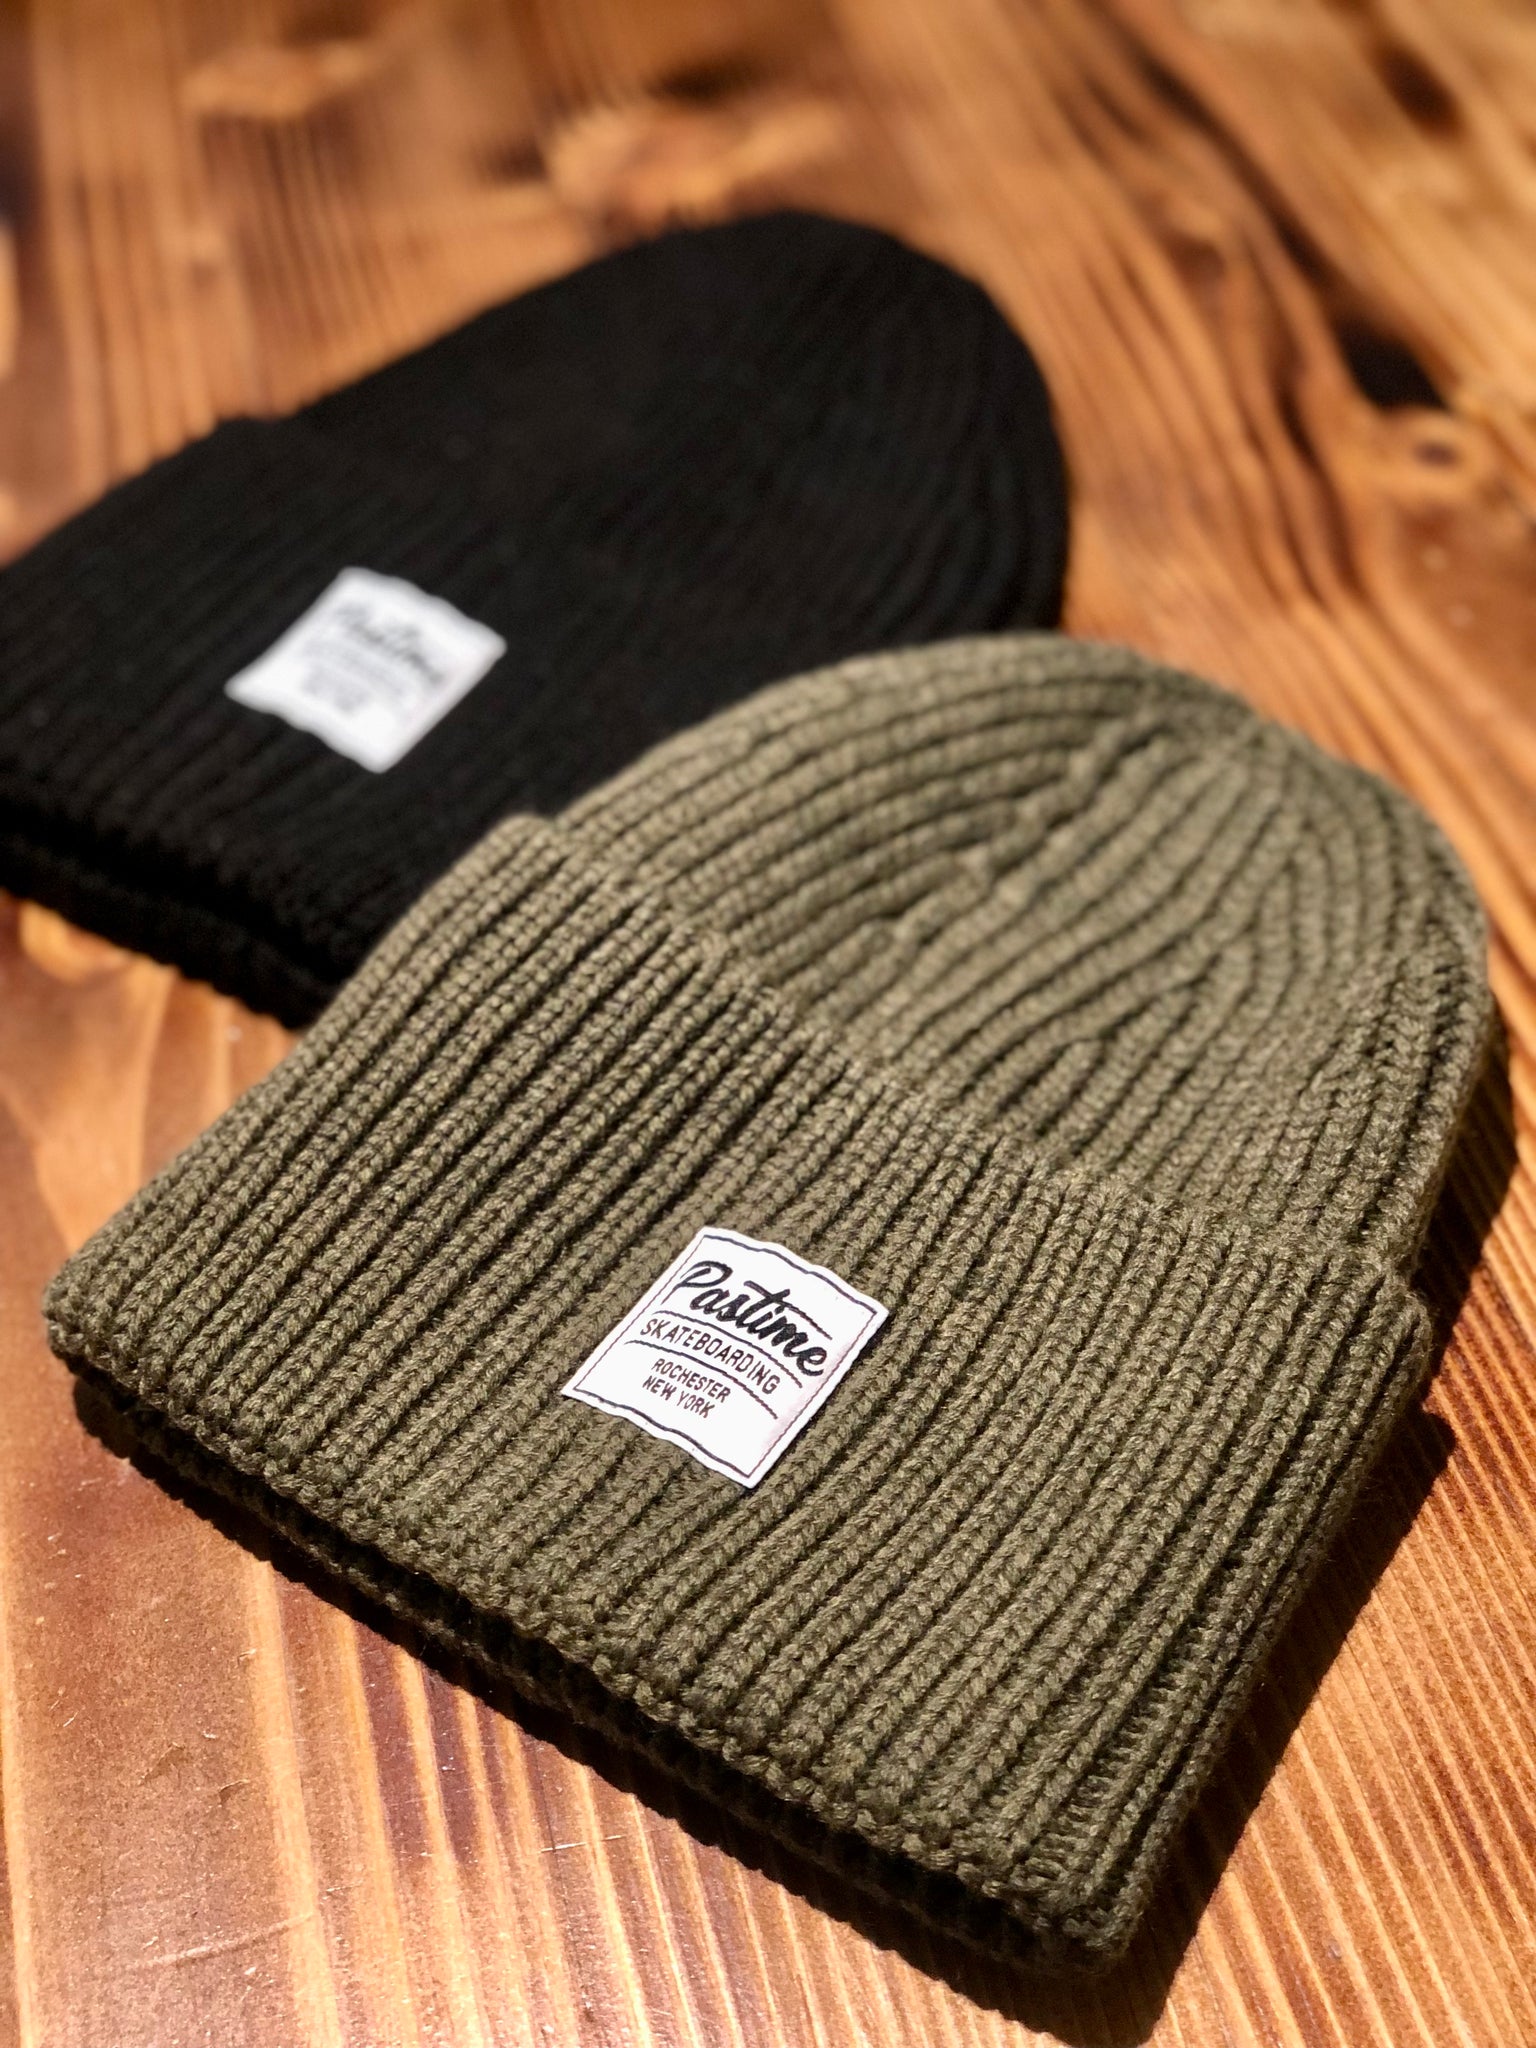 Pastime Beanies - Knit